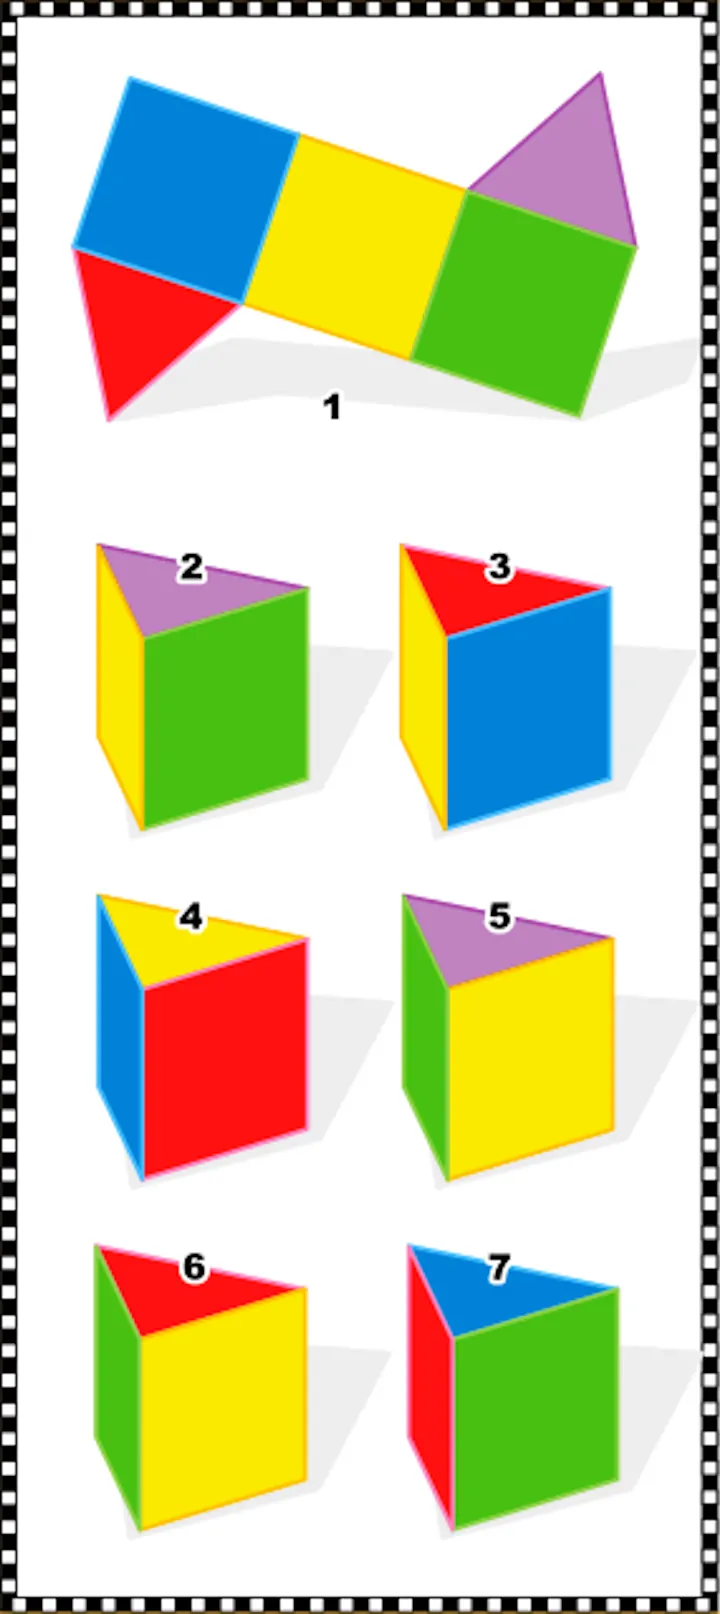 3D prism test - visual spatial intelligence example